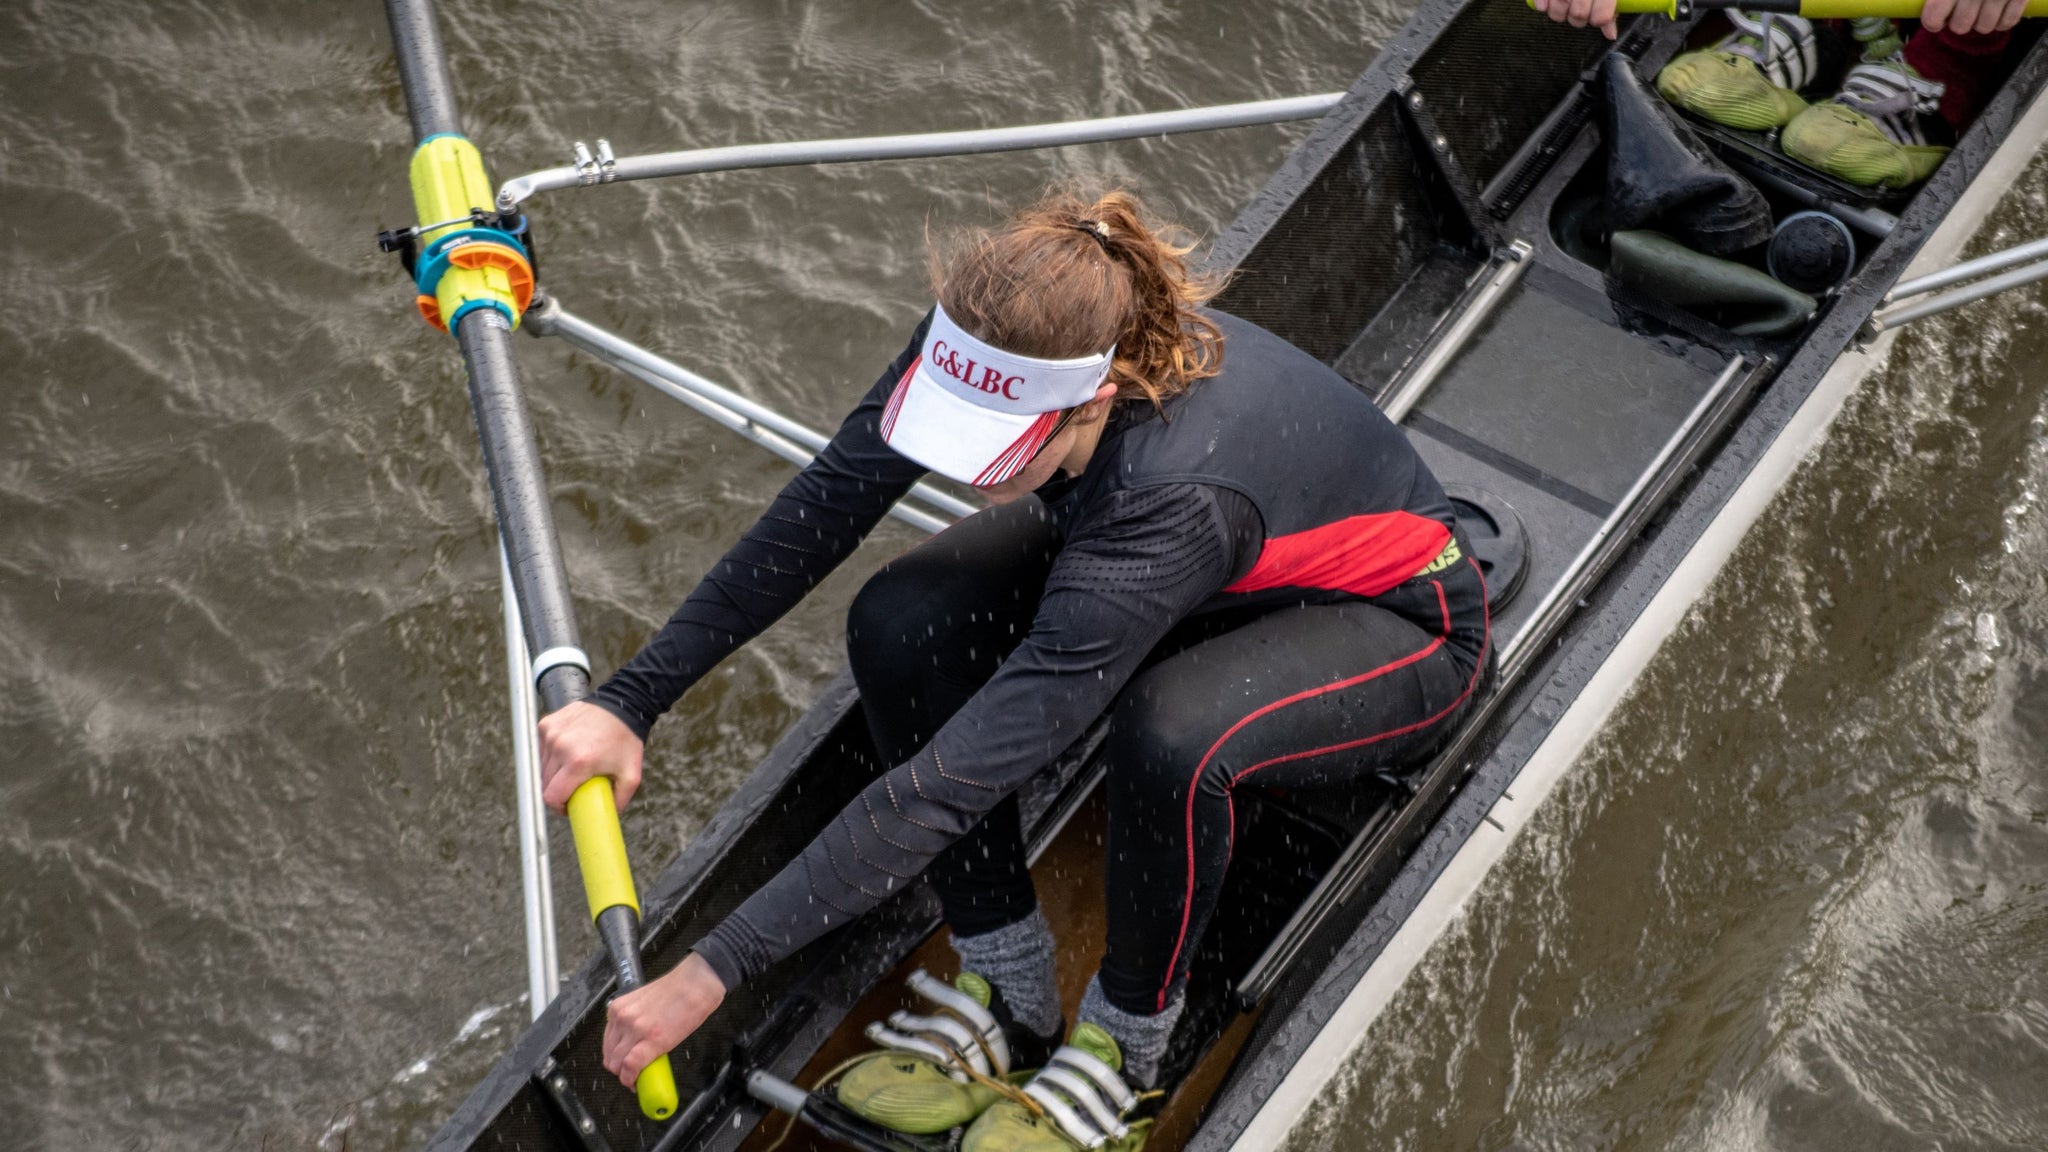 What will Hammersmith Head's cancellation mean to junior crews?